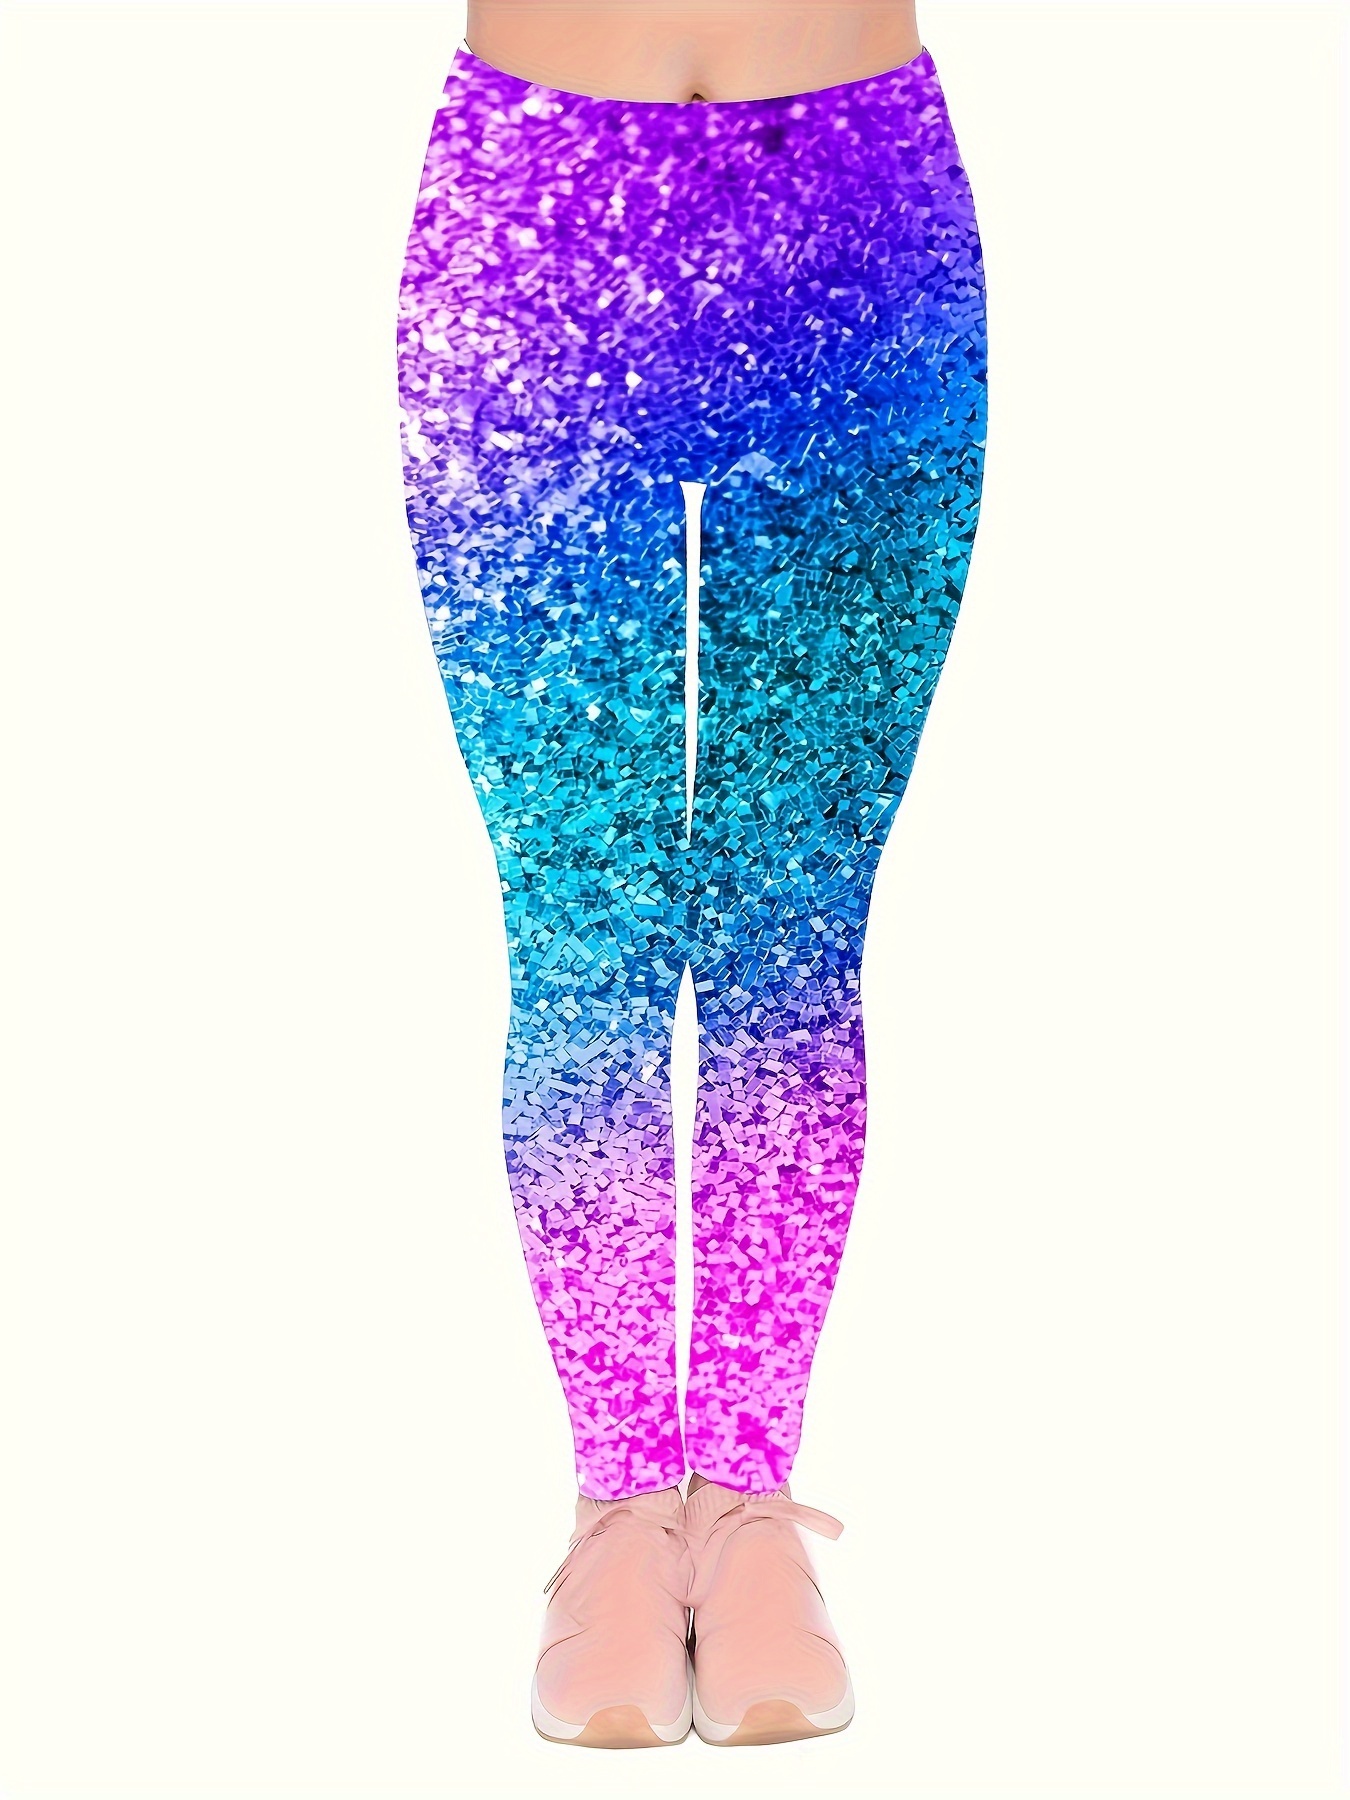  Women's Shiny Yoga Pants High Waisted Running Athletic Workout Leggings  Bling Glitter Metallic Sparkly Tights (Gold, S) : Clothing, Shoes & Jewelry